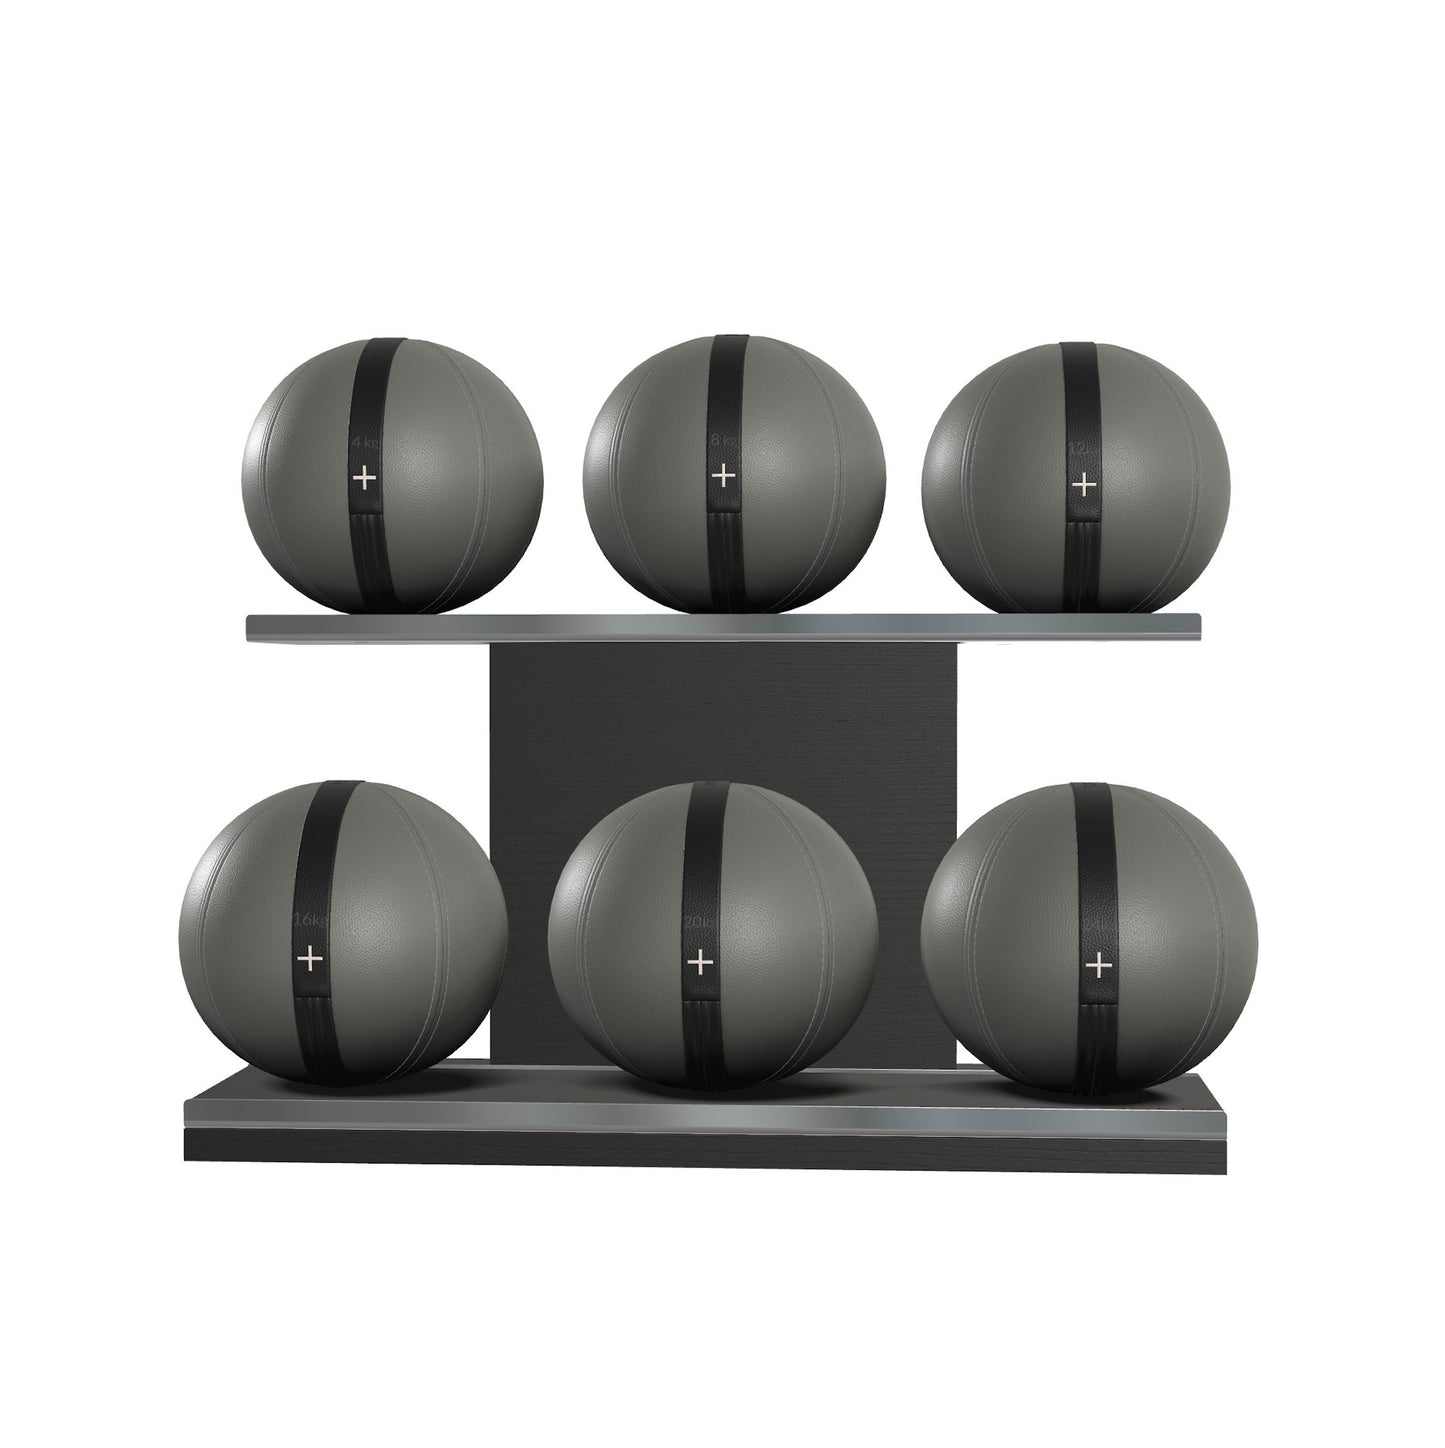 MOXA Set - Ultimate Set of Handcrafted Weighted Balls on Horizontal Wooden Stand